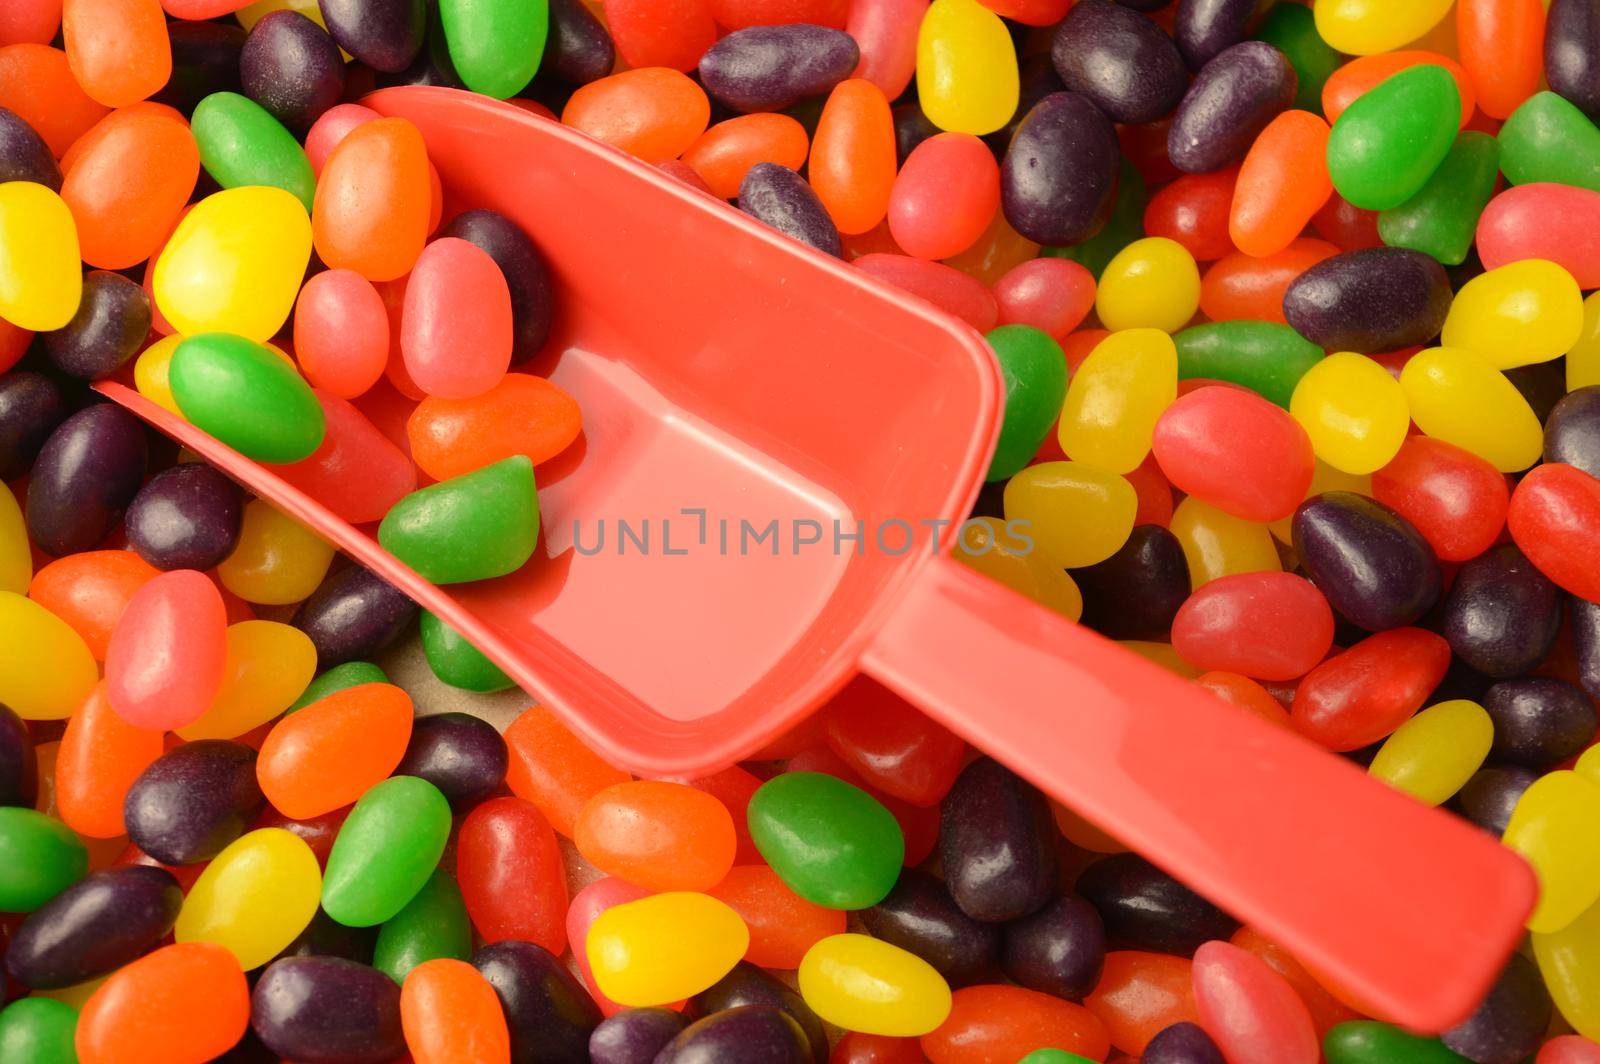 A closeup view of a red scoop in an abundant supply of jelly bean candy.